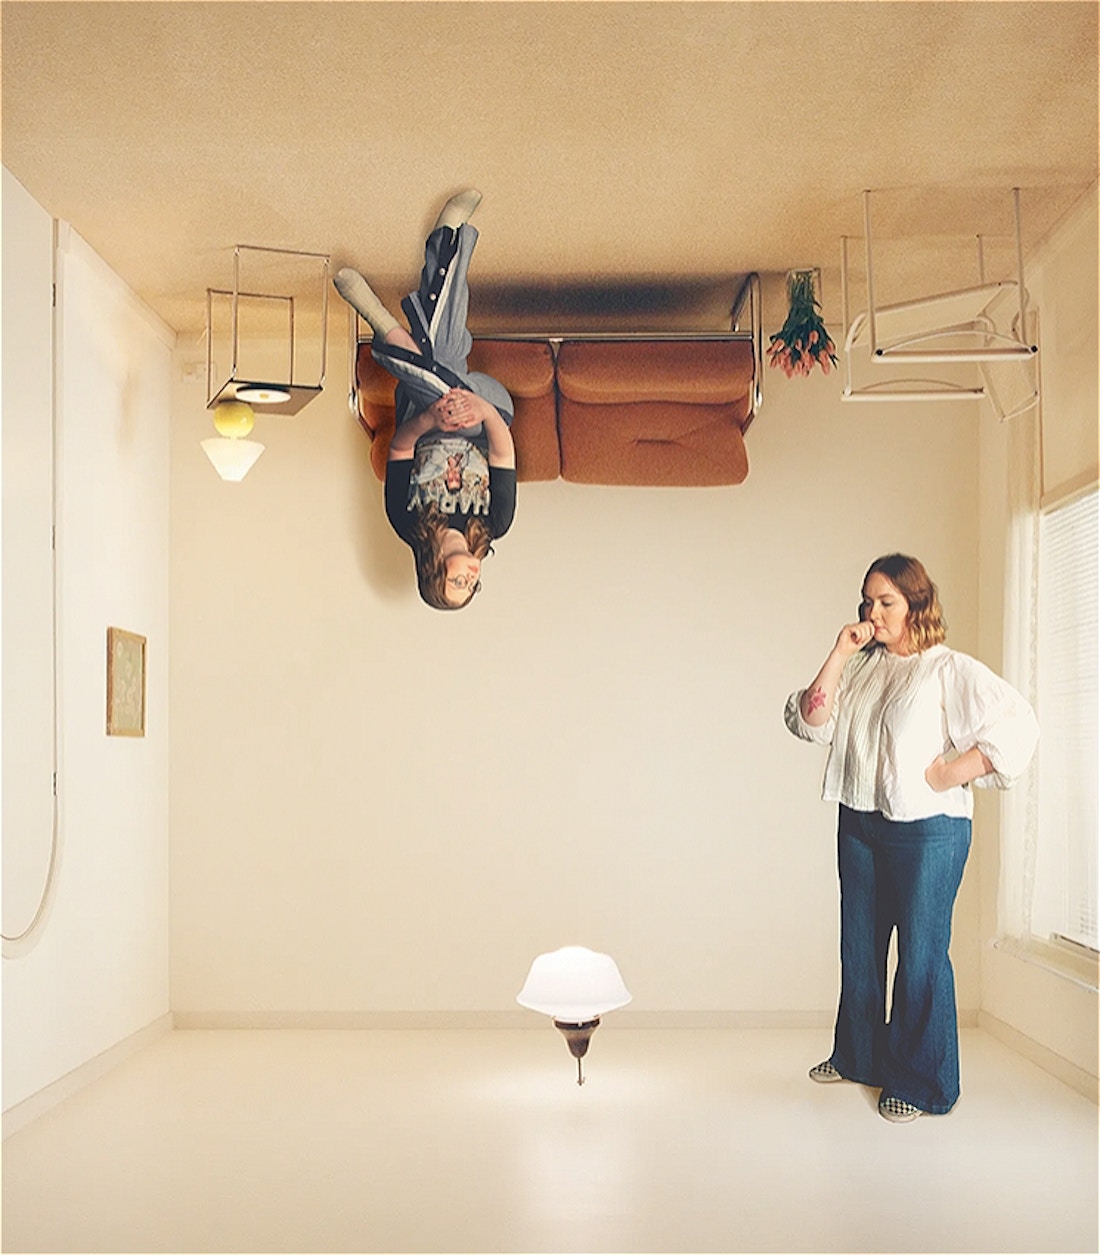 A recreation of Harry Styles' album Harry's House, in which there is an upside down living room. One person is standing upright, looking down thoughtfully. Another person is sitting on the couch looking curiously out the window. They are upside down.